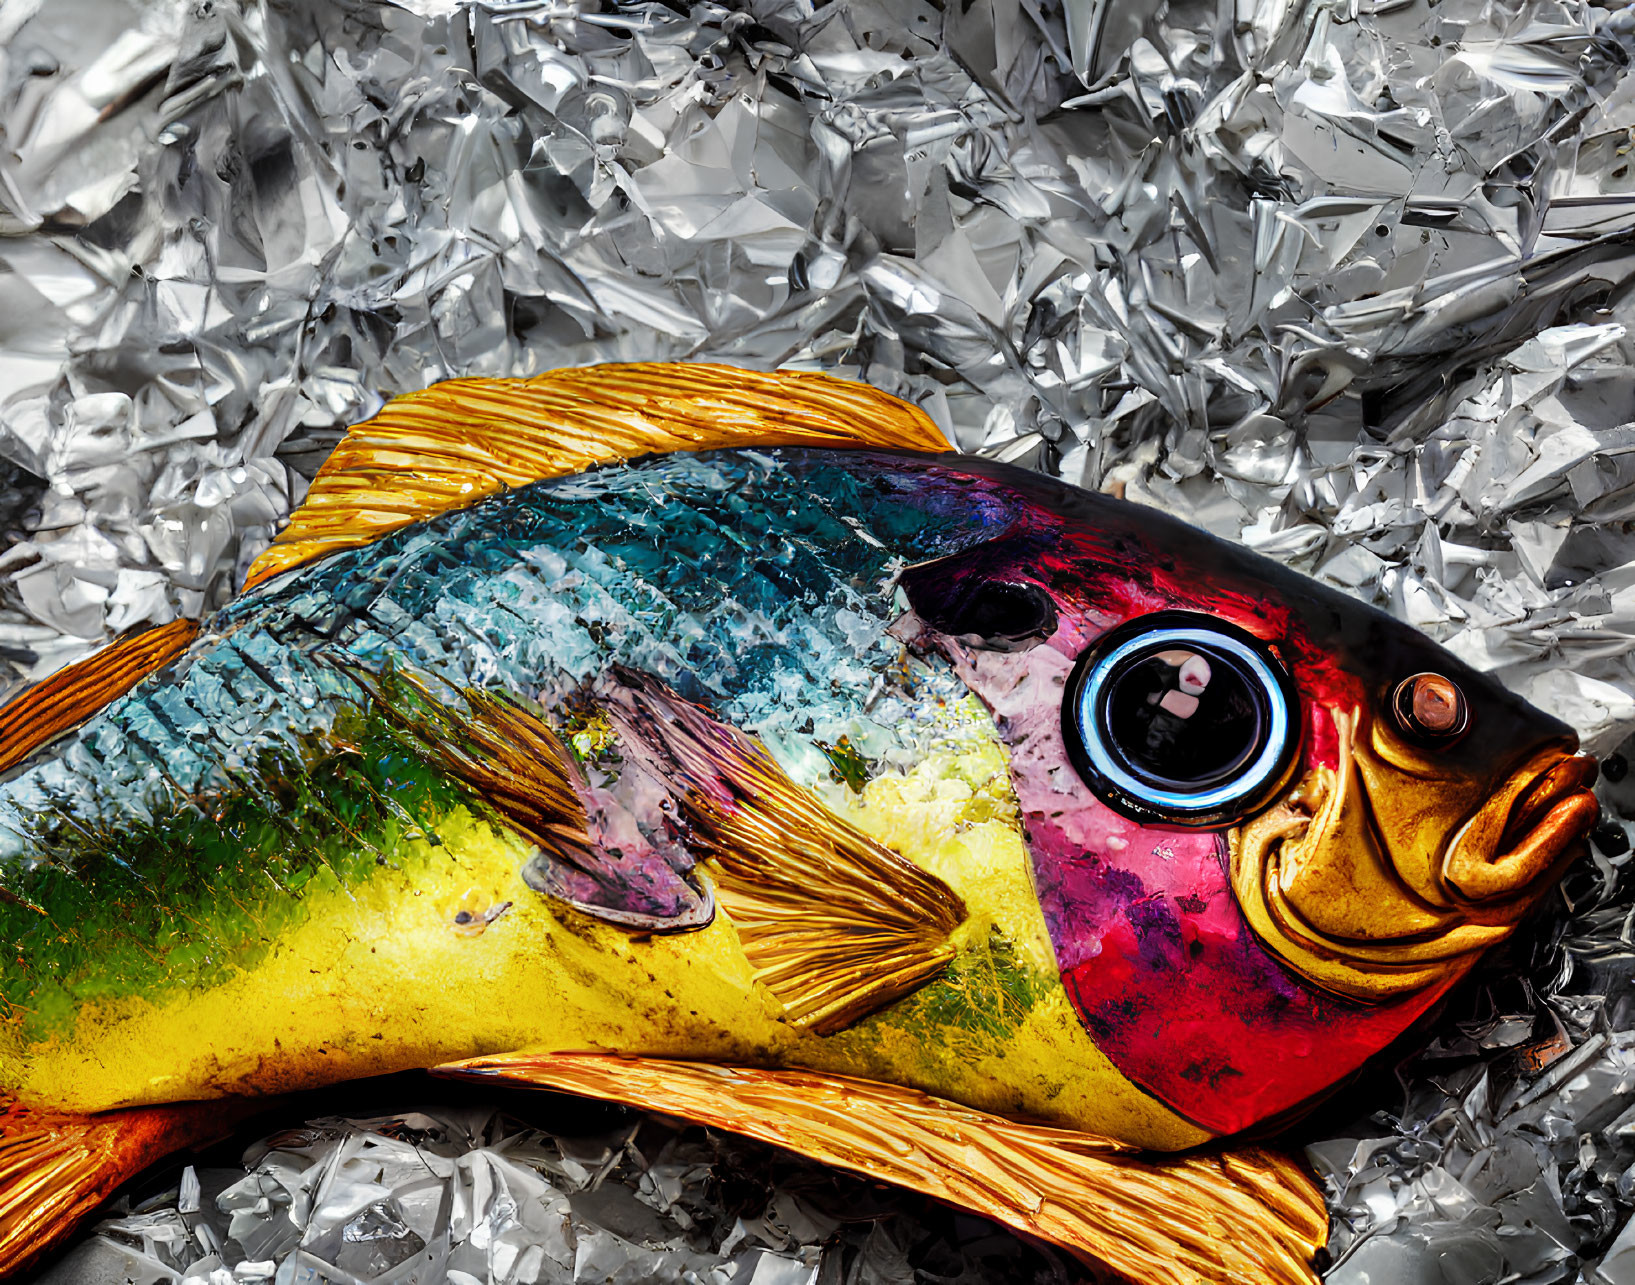 Colorful ceramic fish on crumpled silver foil: Contrasting textures and shimmering reflections